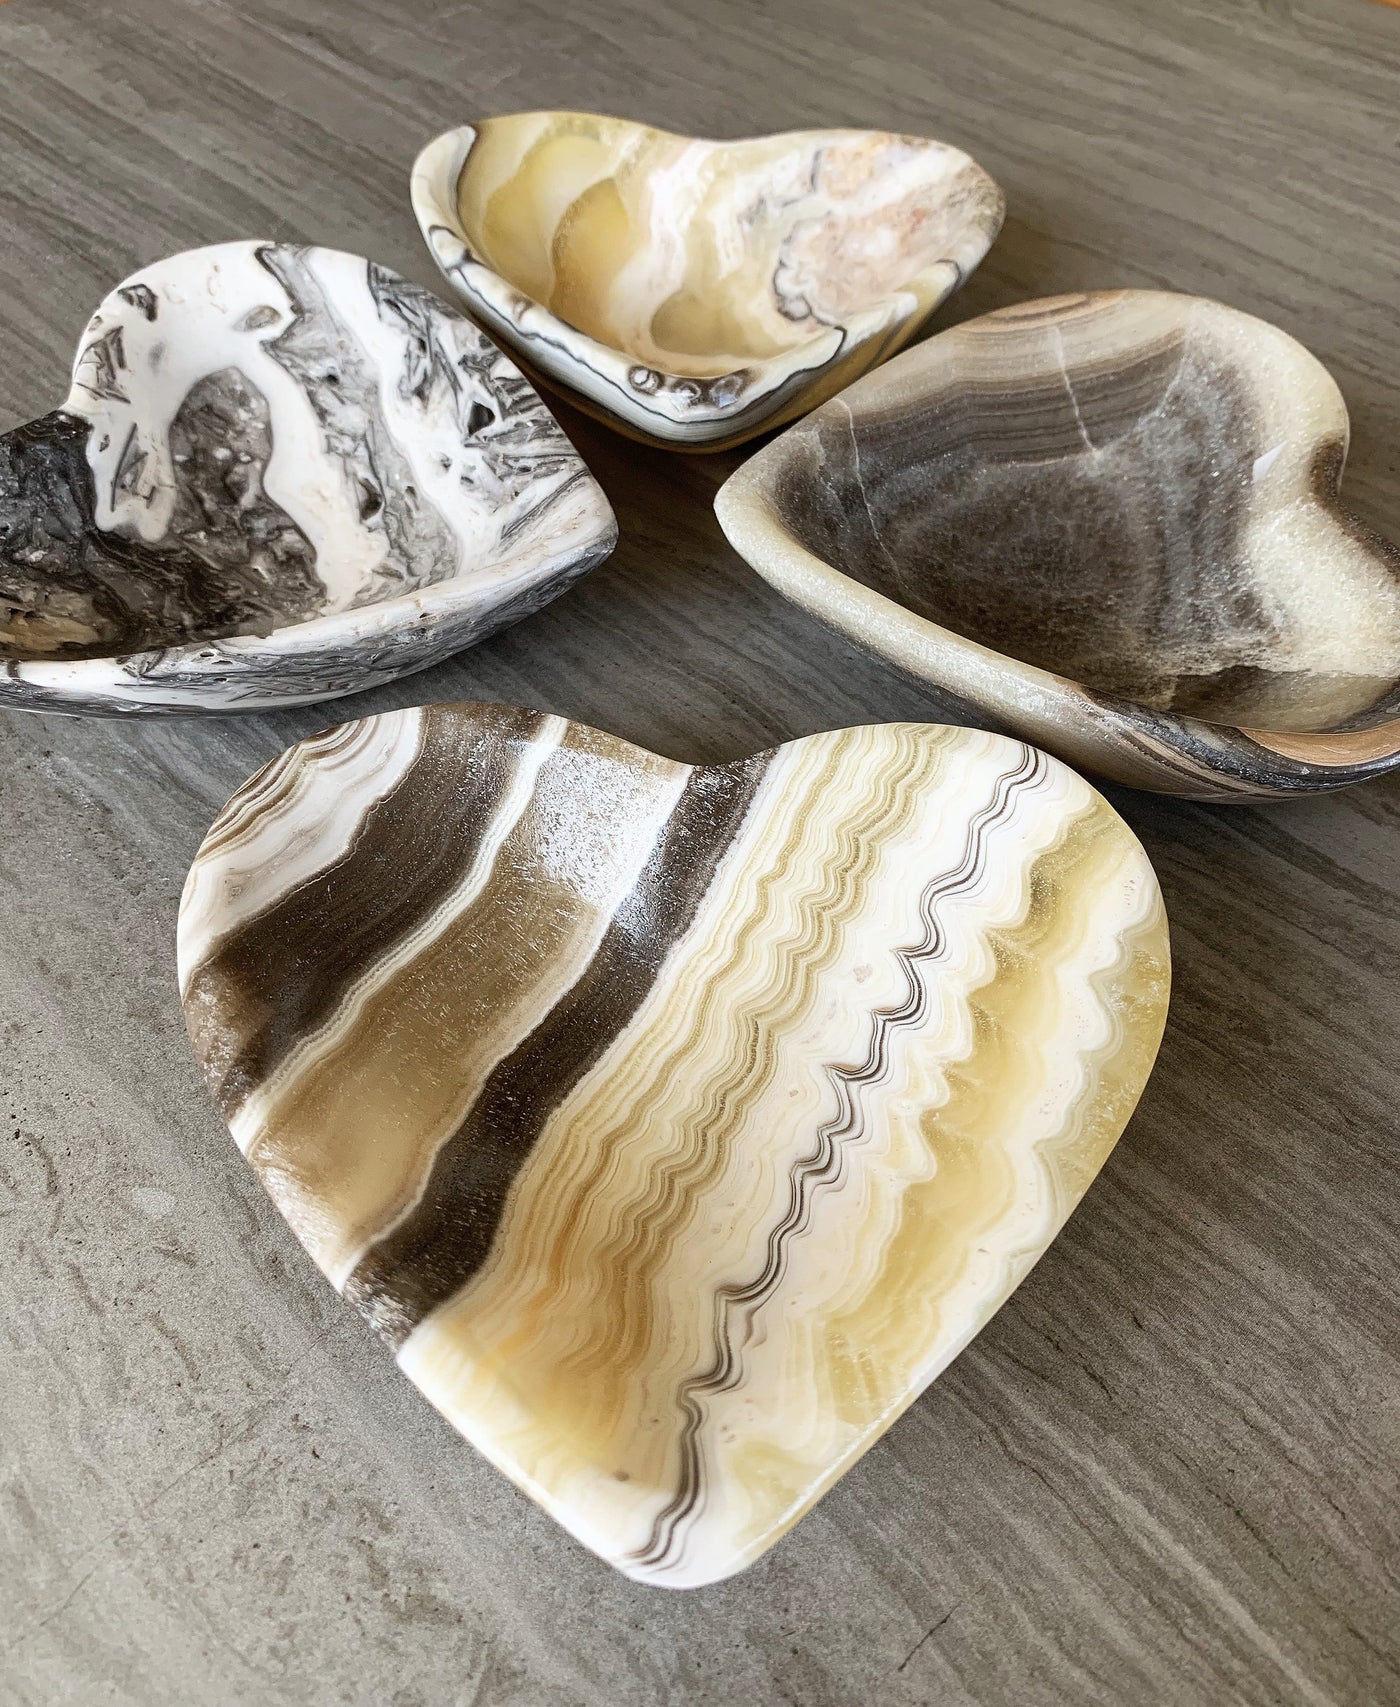 assortment of mexican onyx heart bowls shown to display they vary in color and patterns with shades of white, yellow, tan, cream, and black.